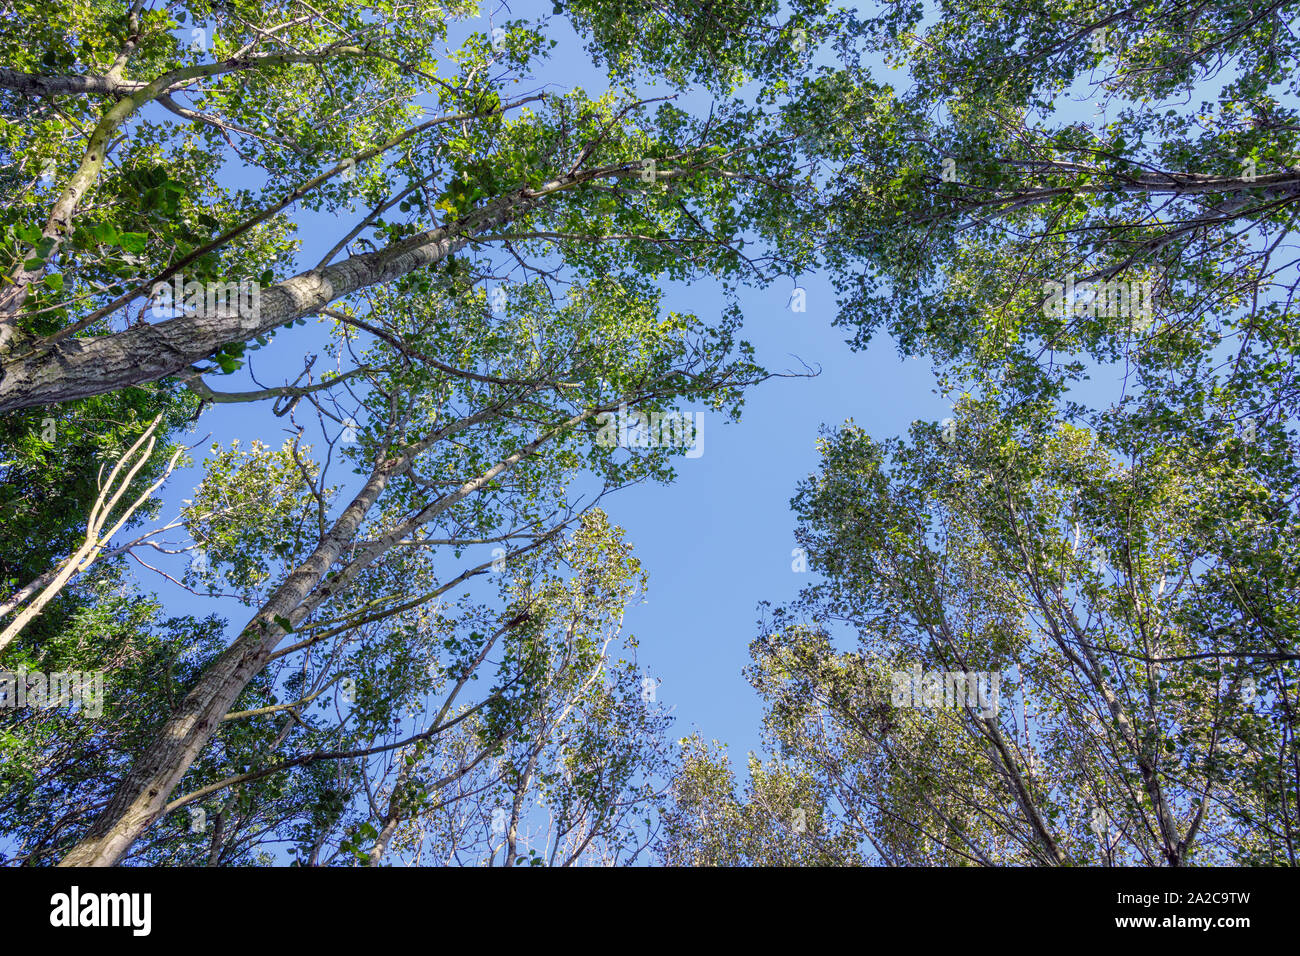 Looking up through a tree canopy fotmed by Poplar trees, against a bright blue sky Stock Photo